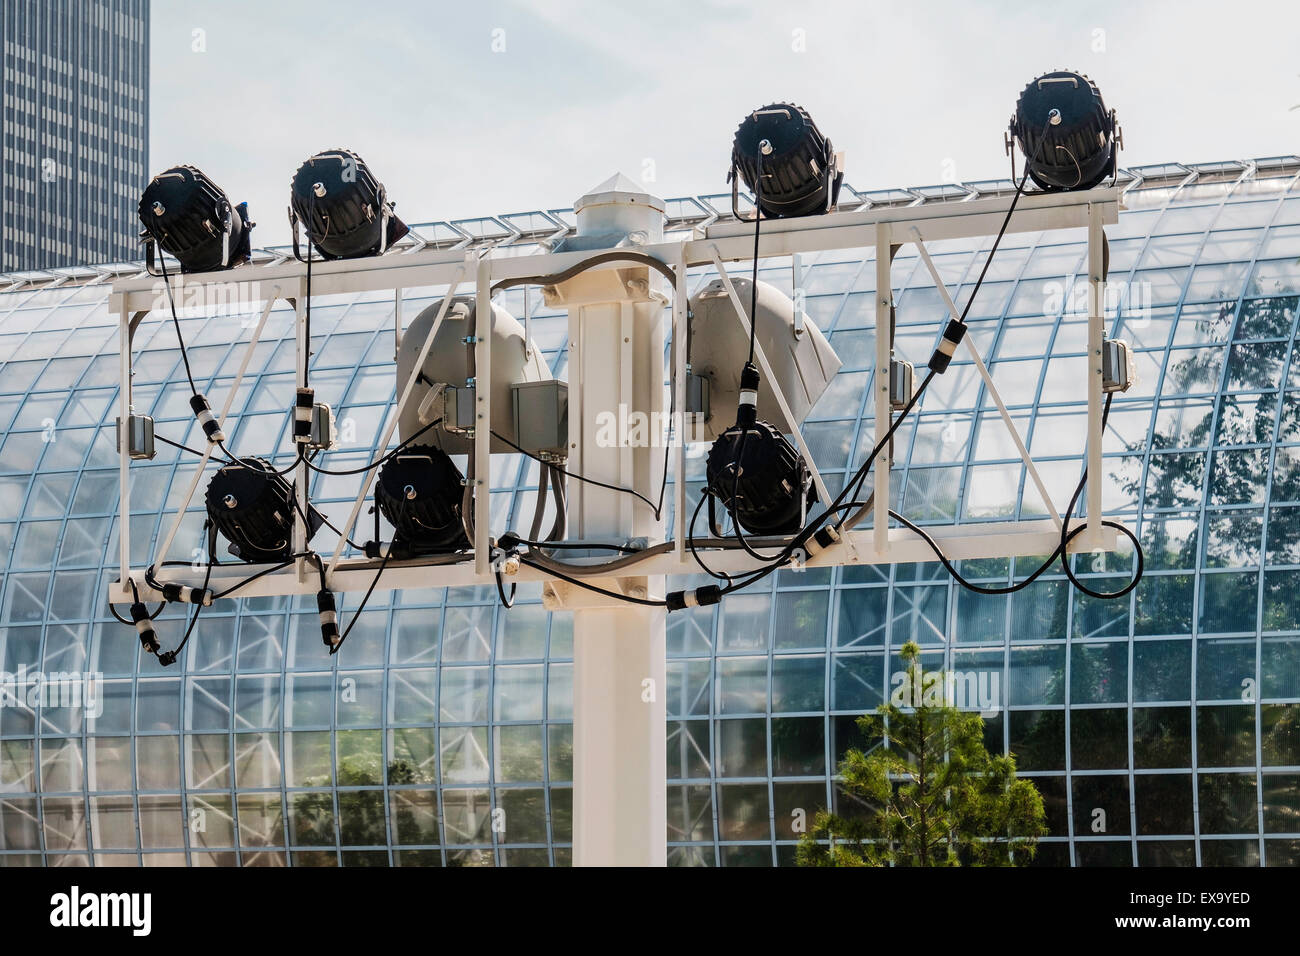 A set of spotlights on a sturdy pole and frame, meant to light up the Crystal Bridge, a tropical conservatory in Oklahoma City, USA Stock Photo